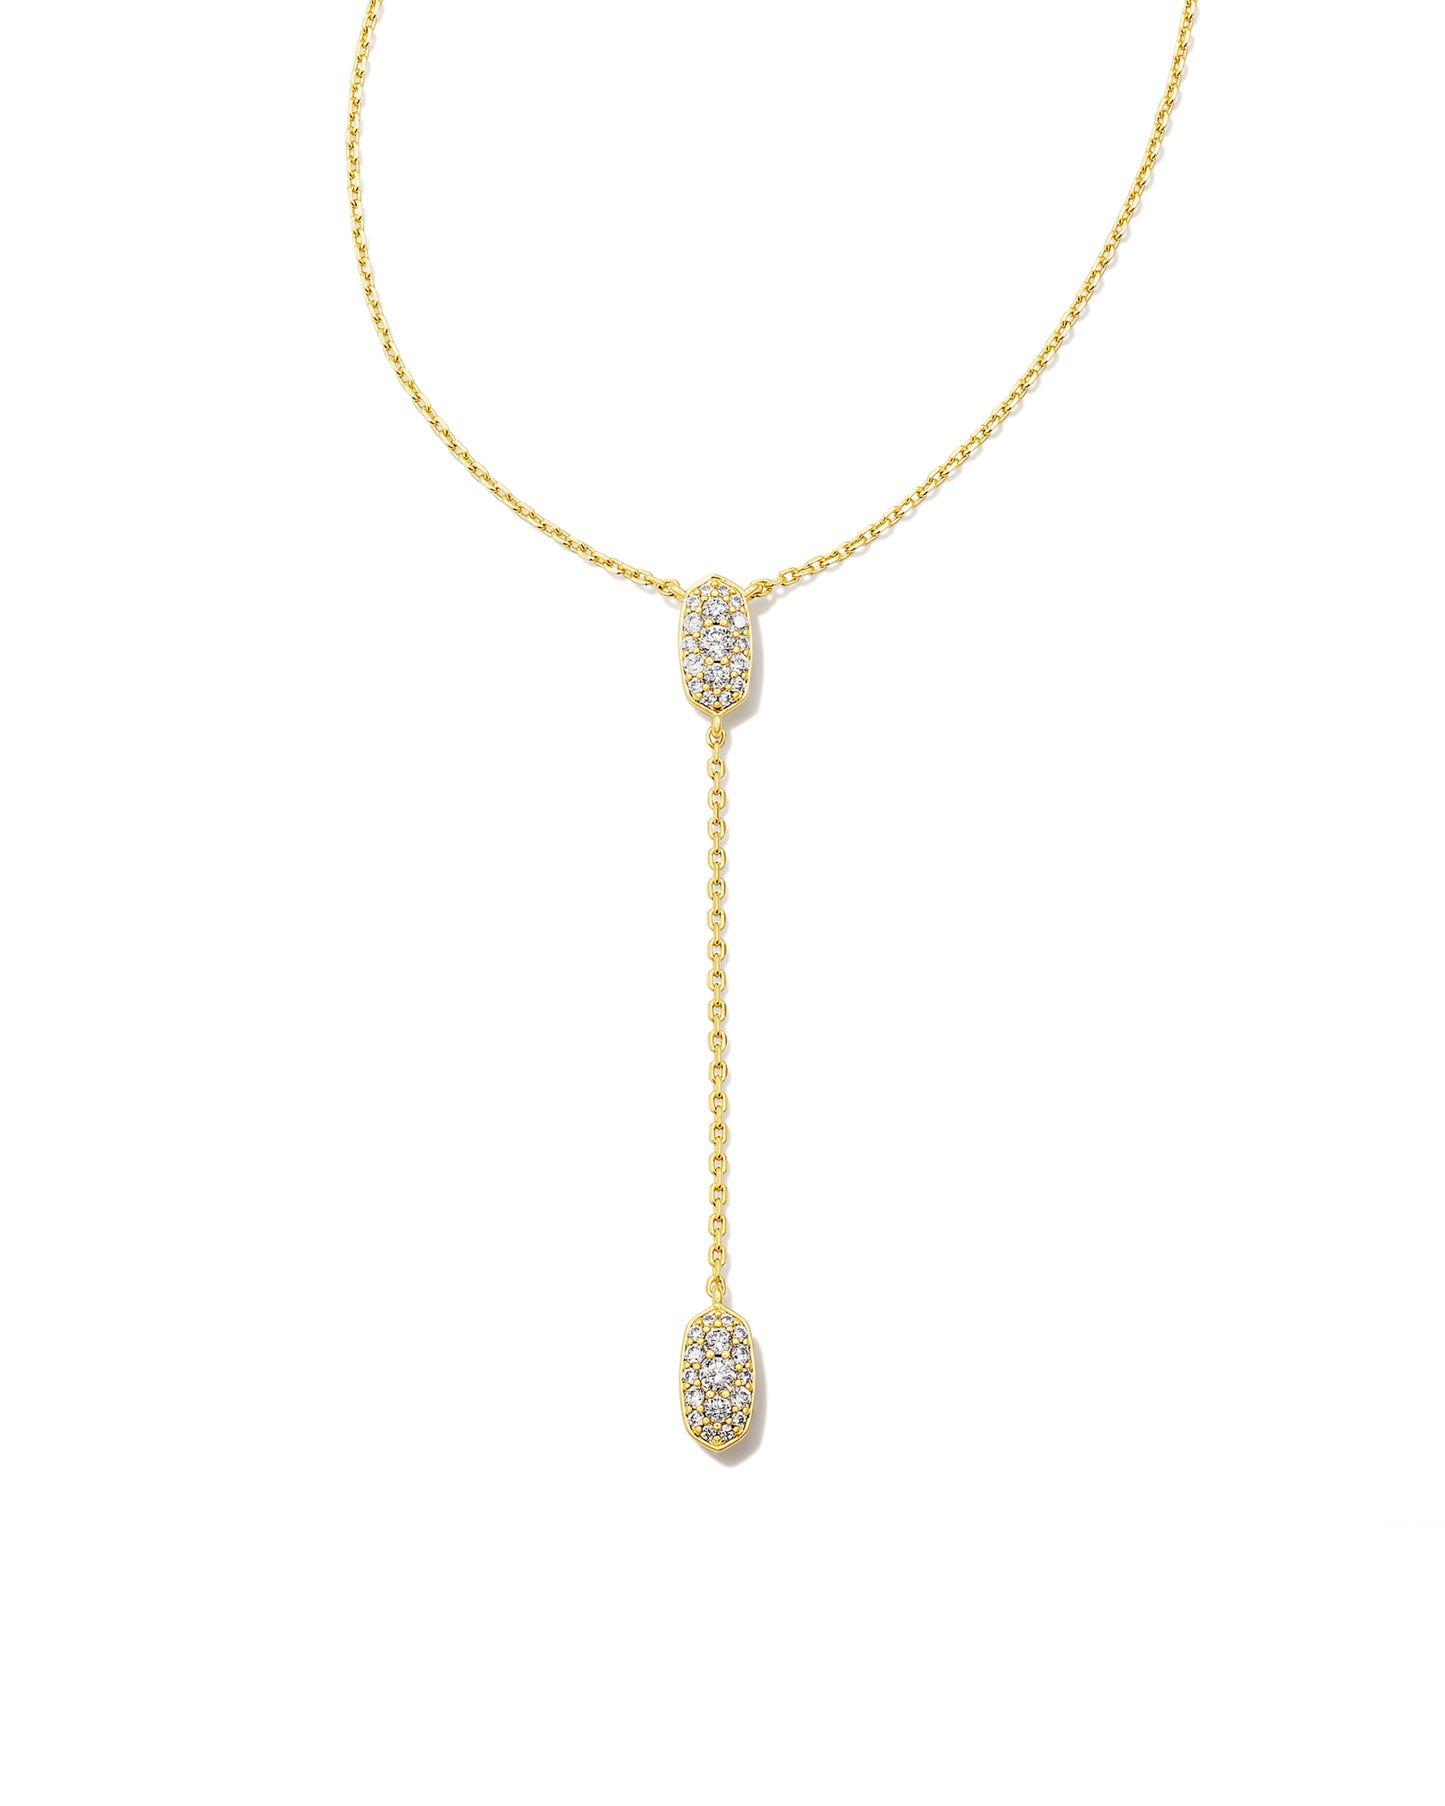 Kendra Scott Grayson Y Necklace Gold White CZ-Necklaces-Kendra Scott-N00328GLD-The Twisted Chandelier